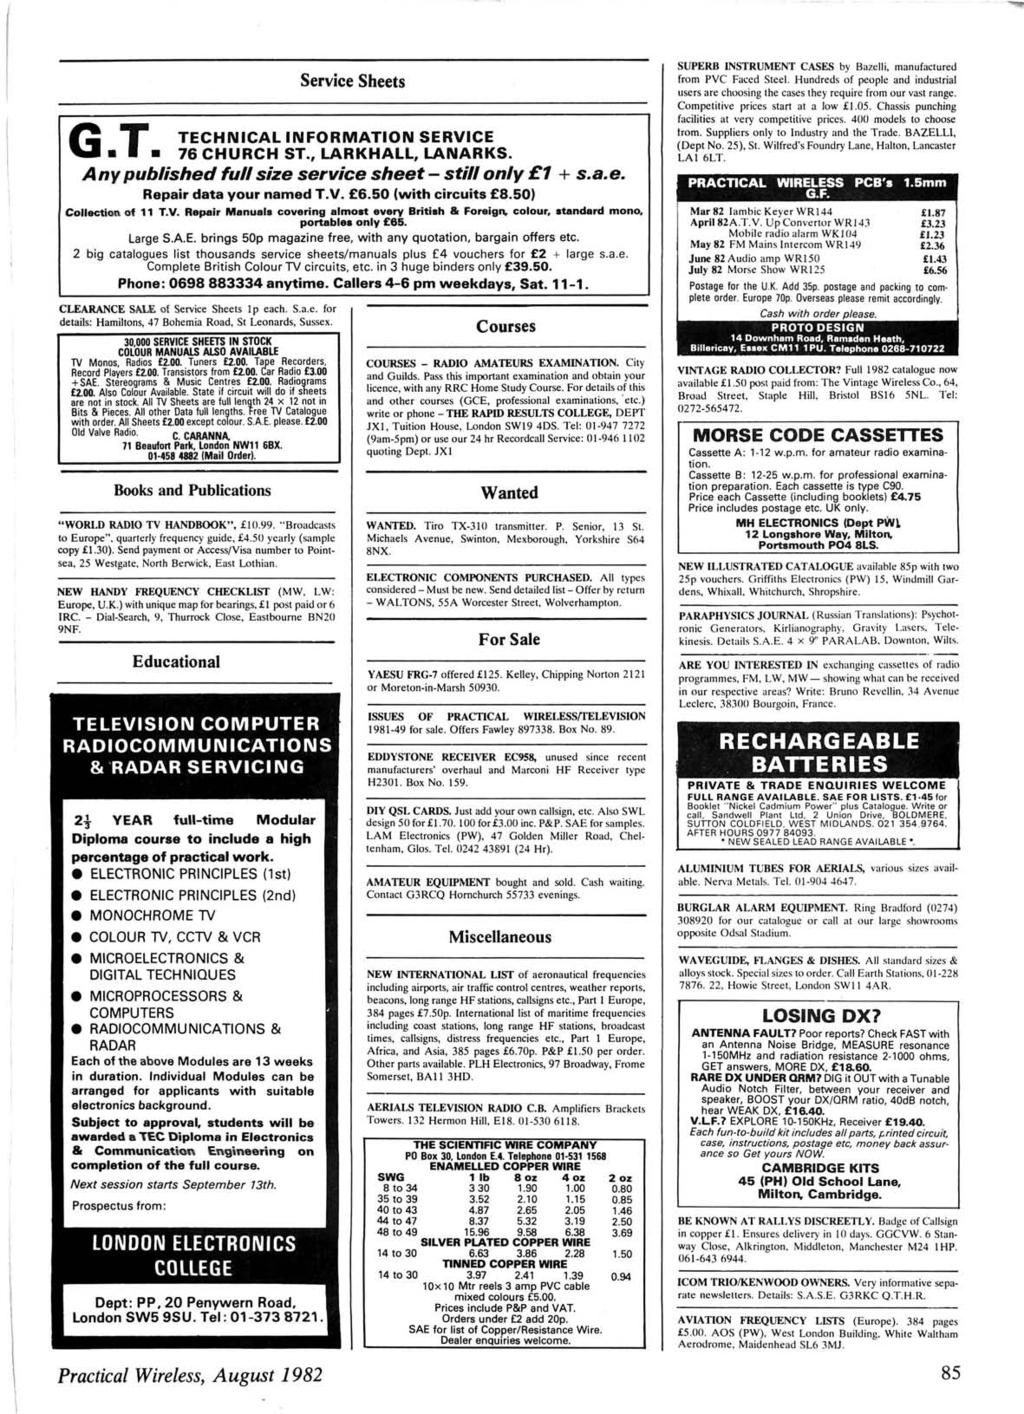 - G T Service Sheets TECHNCAL NFORMATON SERVCE 76 CHURCH ST., LARKHALL, LANARKS. A ny published full size service sheet - still only 1 + s.a.e. Repair data your named T.V. 6.50 (with circuits 8.